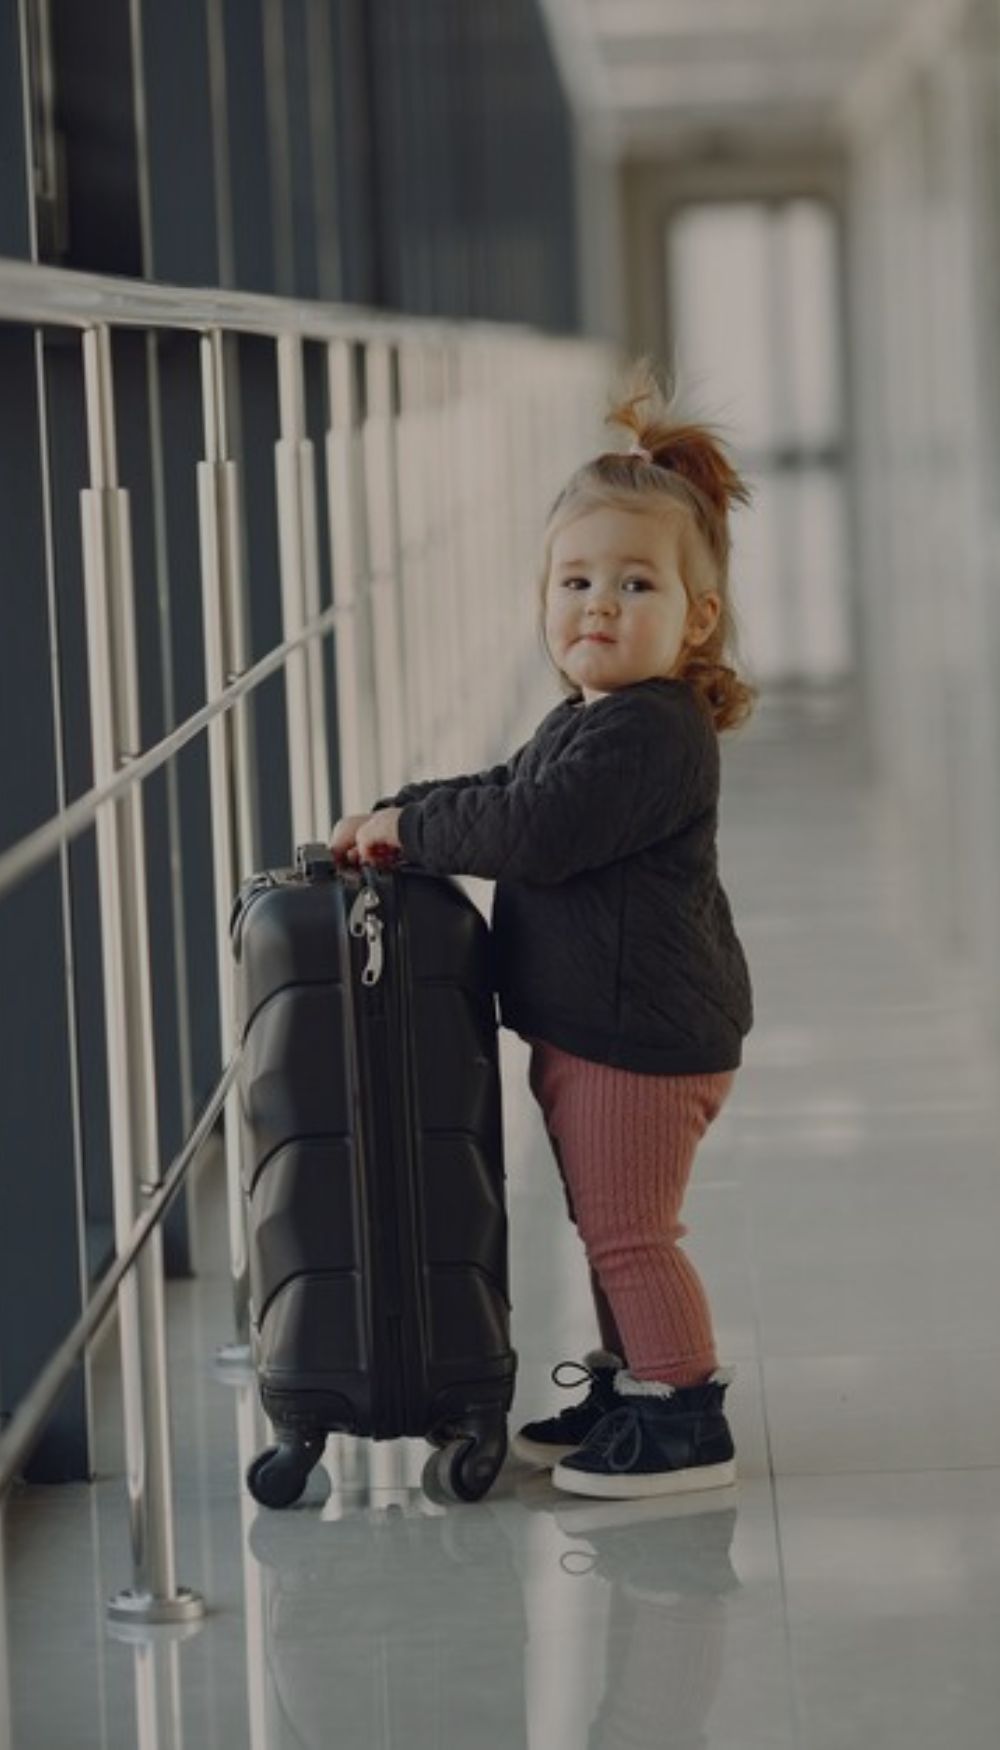 Kids Travel Luggage Black Friday Deals - 8 Must-Have Bags